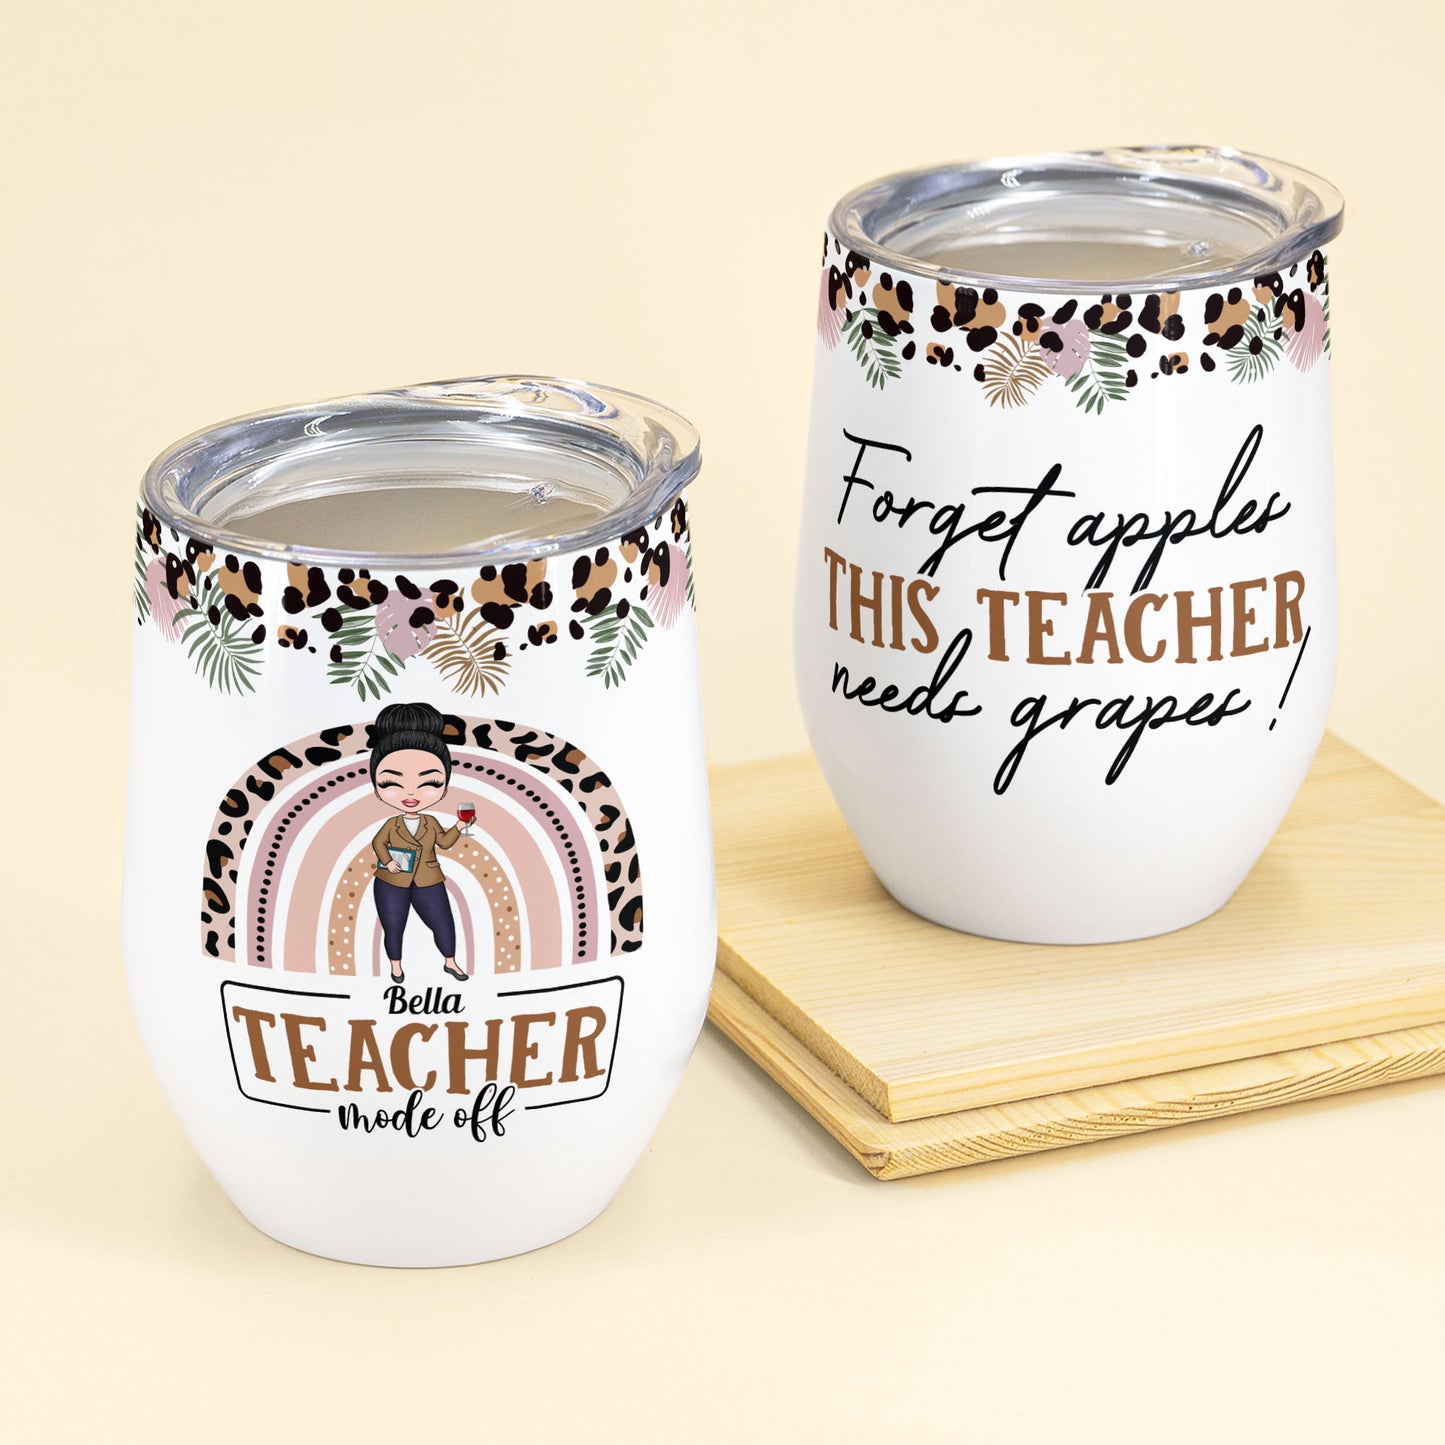 Forget Apples This Teacher Needs Grapes - Personalized Wine Tumbler - Birthday, Summer, Year End Gift For Teachers, Lecturers, Teacher Assistant